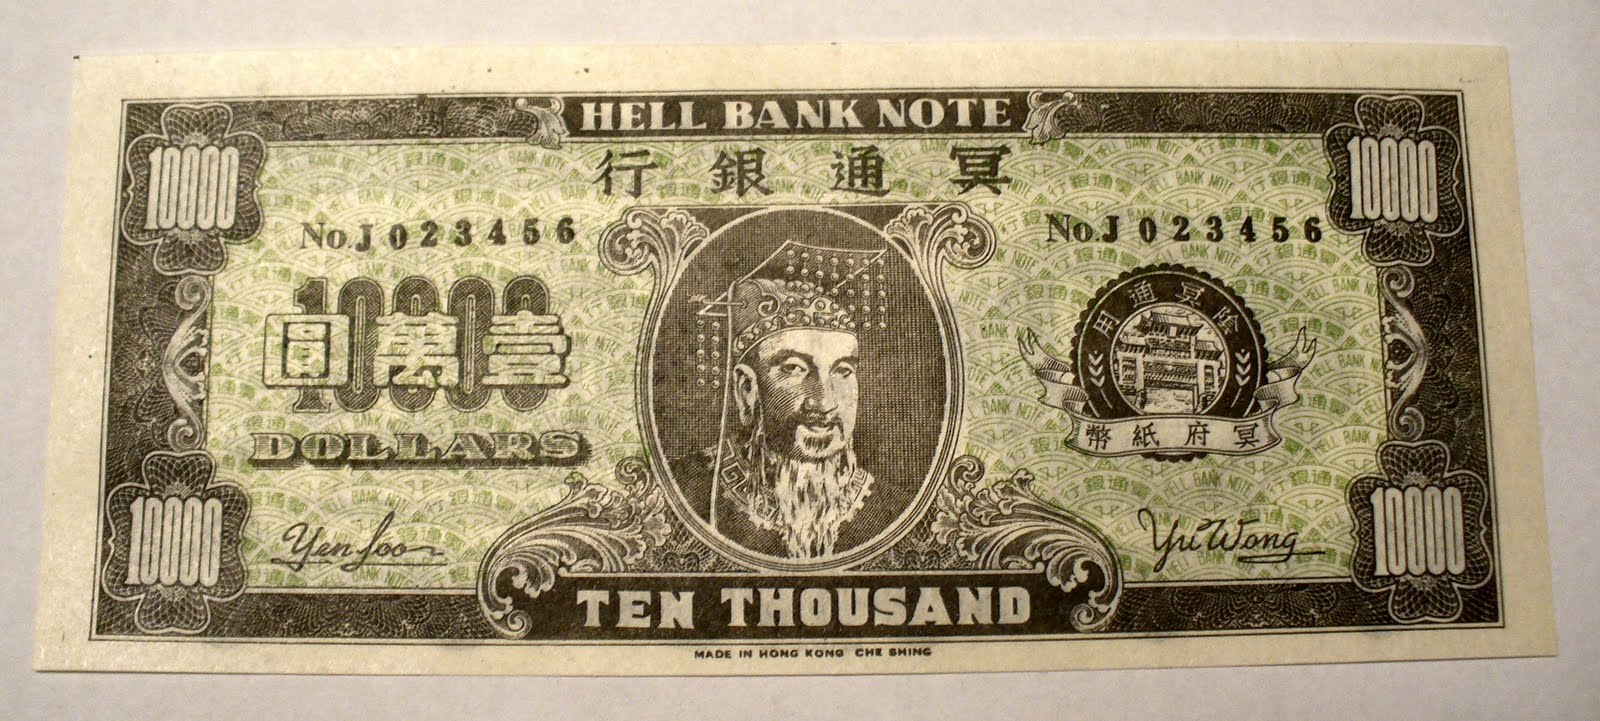 T me bank notes